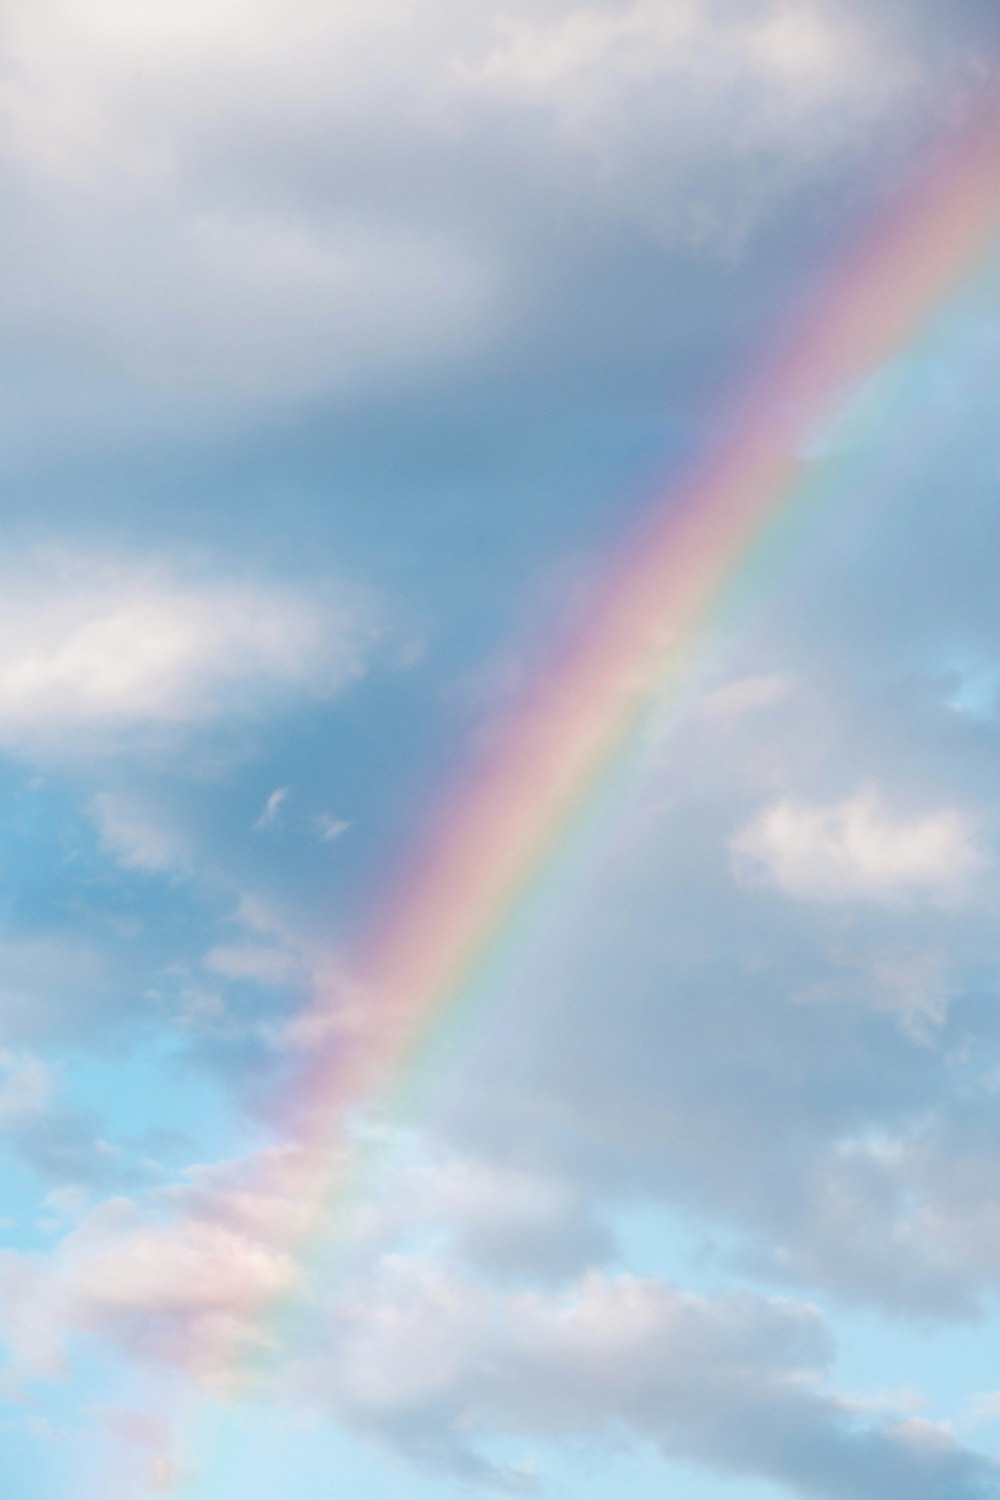 Vibrant rainbow background sky images for stunning design